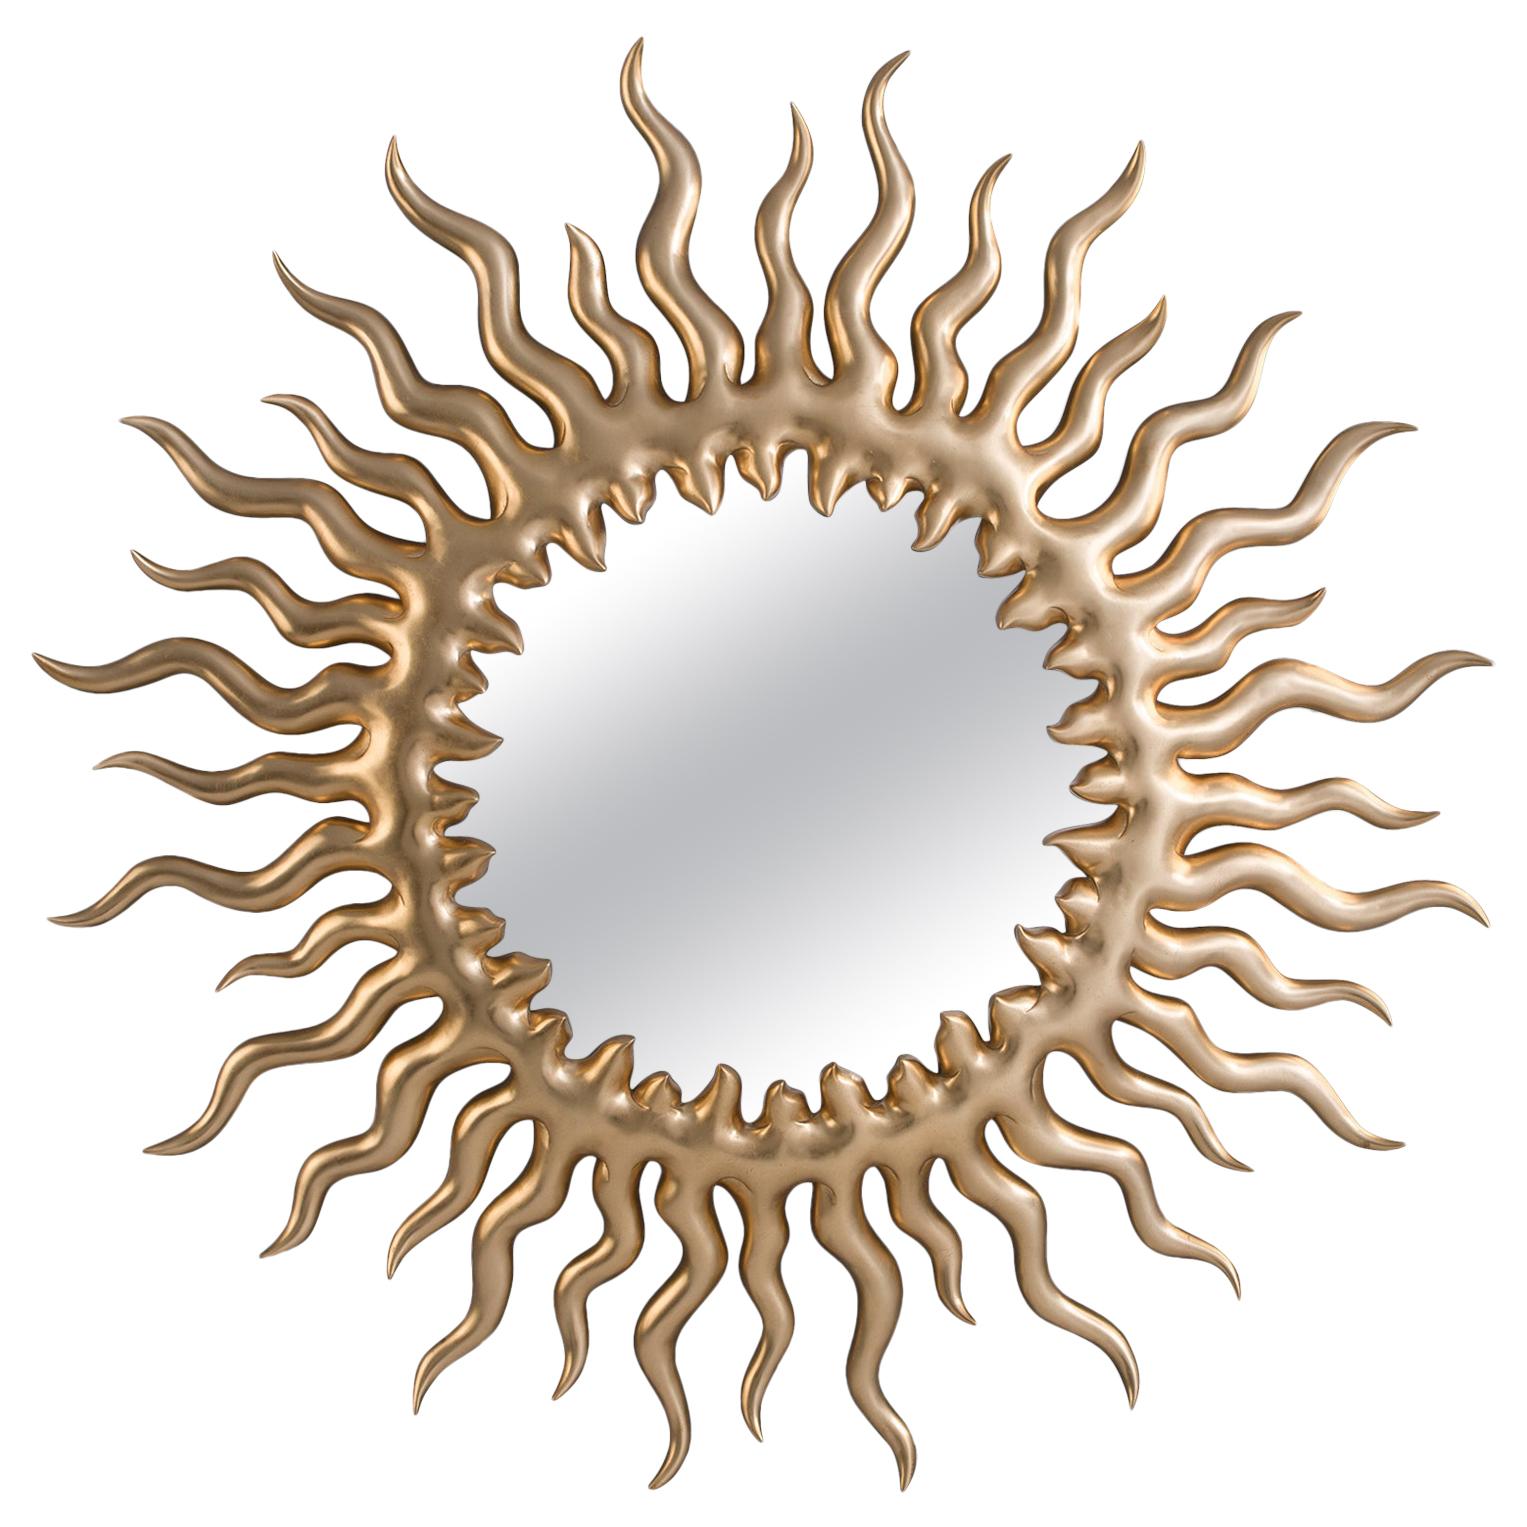 Melting Sun Mirror with Gold Paint For Sale